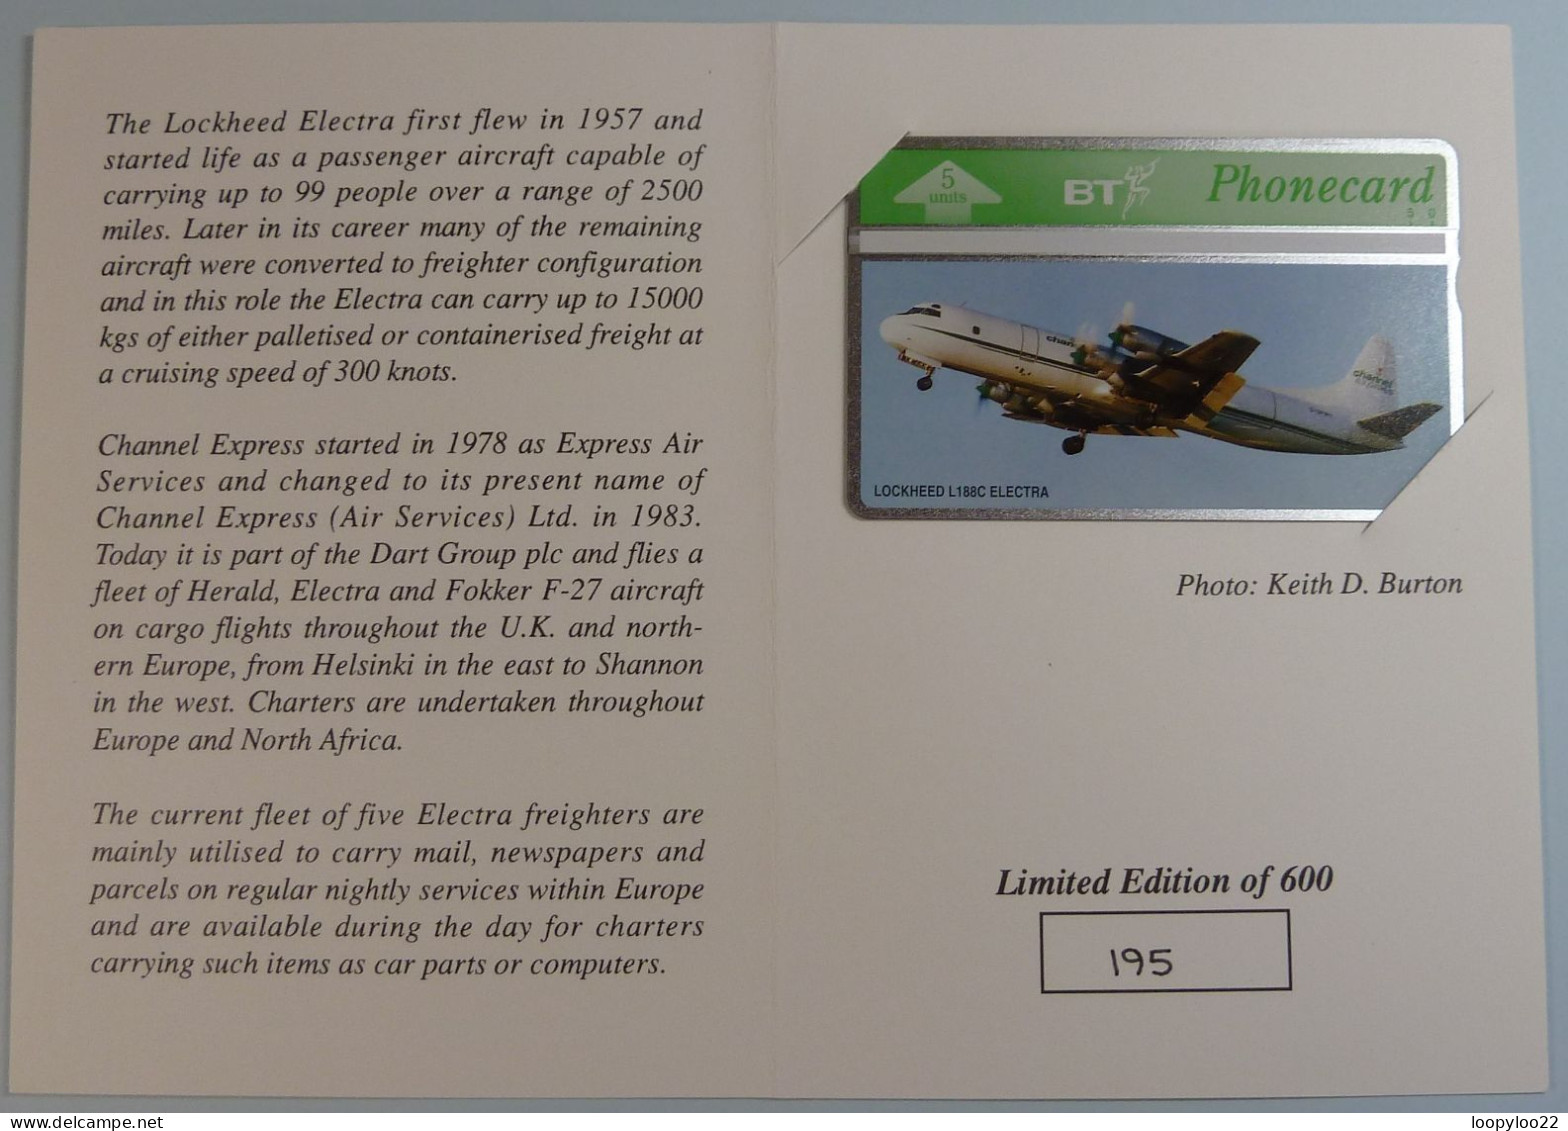 UK - BT - L&G - Channel Express - Lockheed Electra - 406B - Limited Edition In Folder - 600ex - Mint - BT General Issues